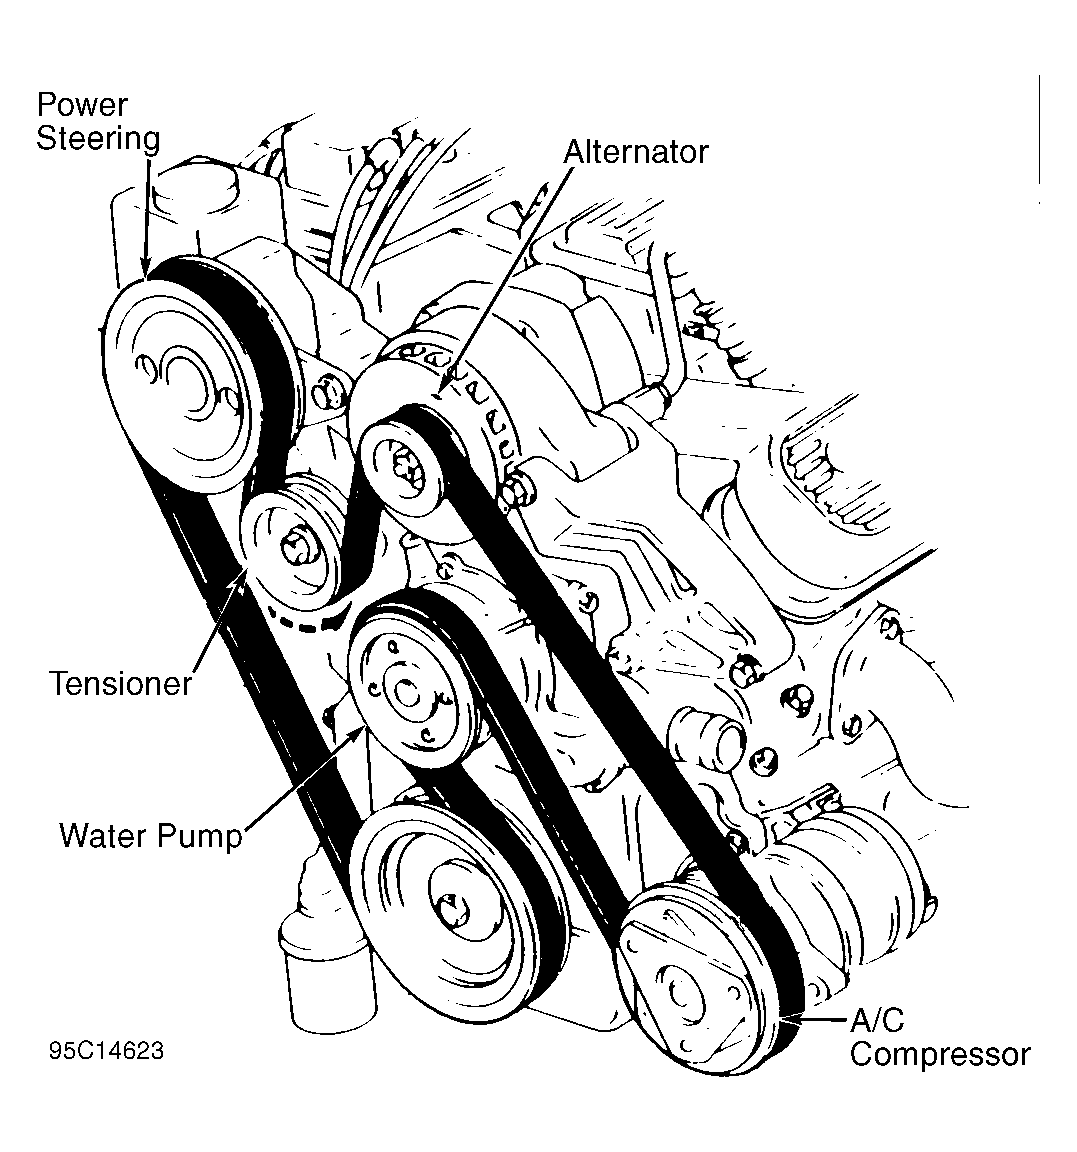 1995 Buick LeSabre Serpentine Belt Routing and Timing Belt Diagrams